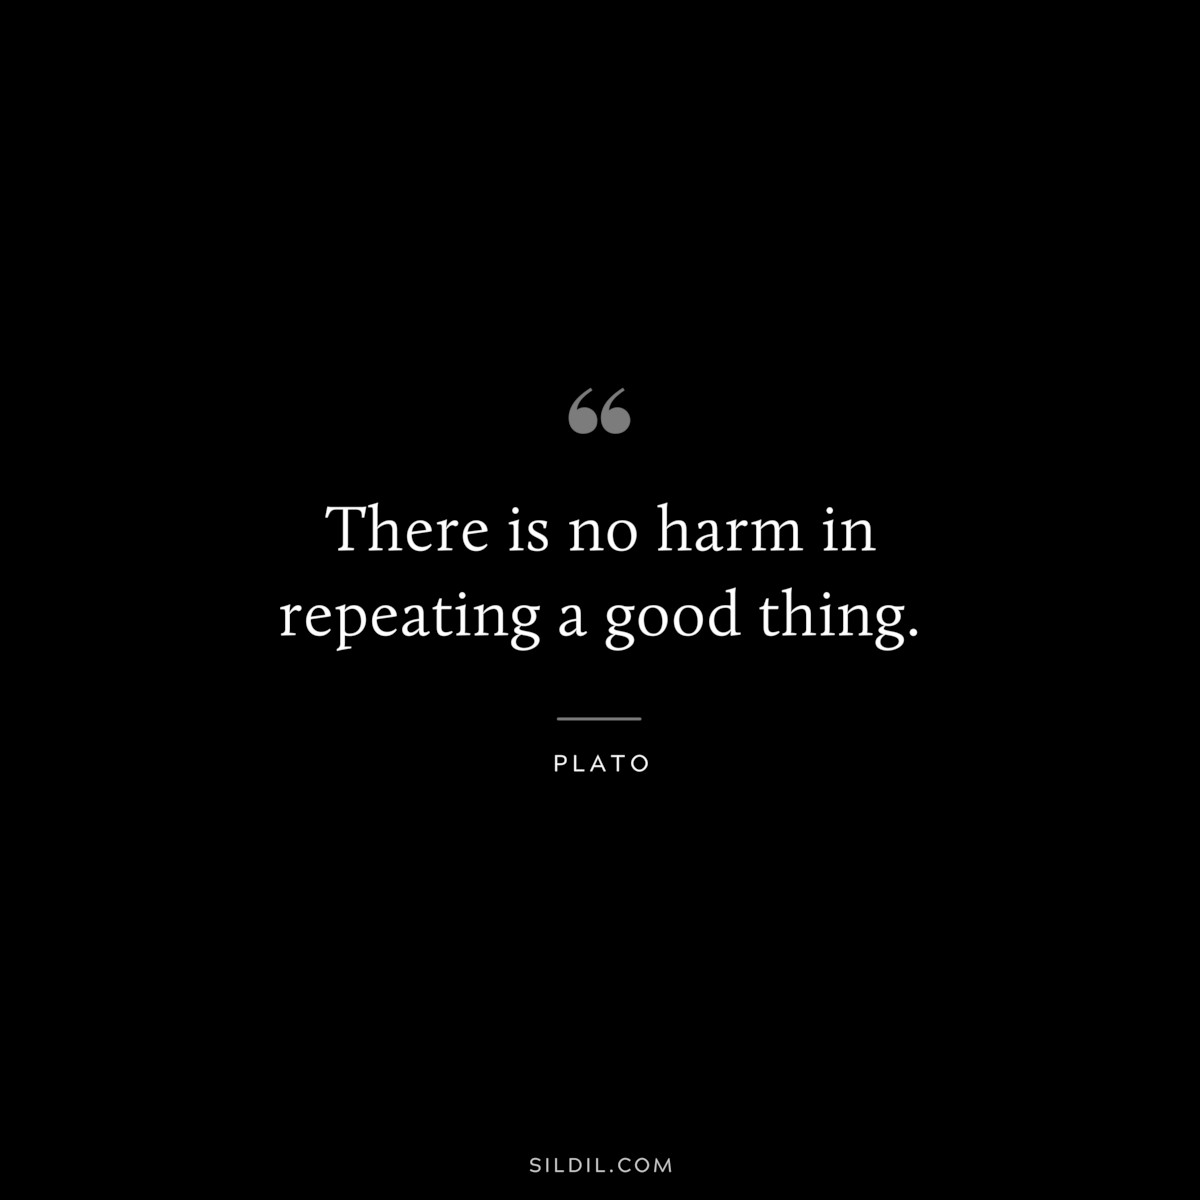 There is no harm in repeating a good thing. ― Plato